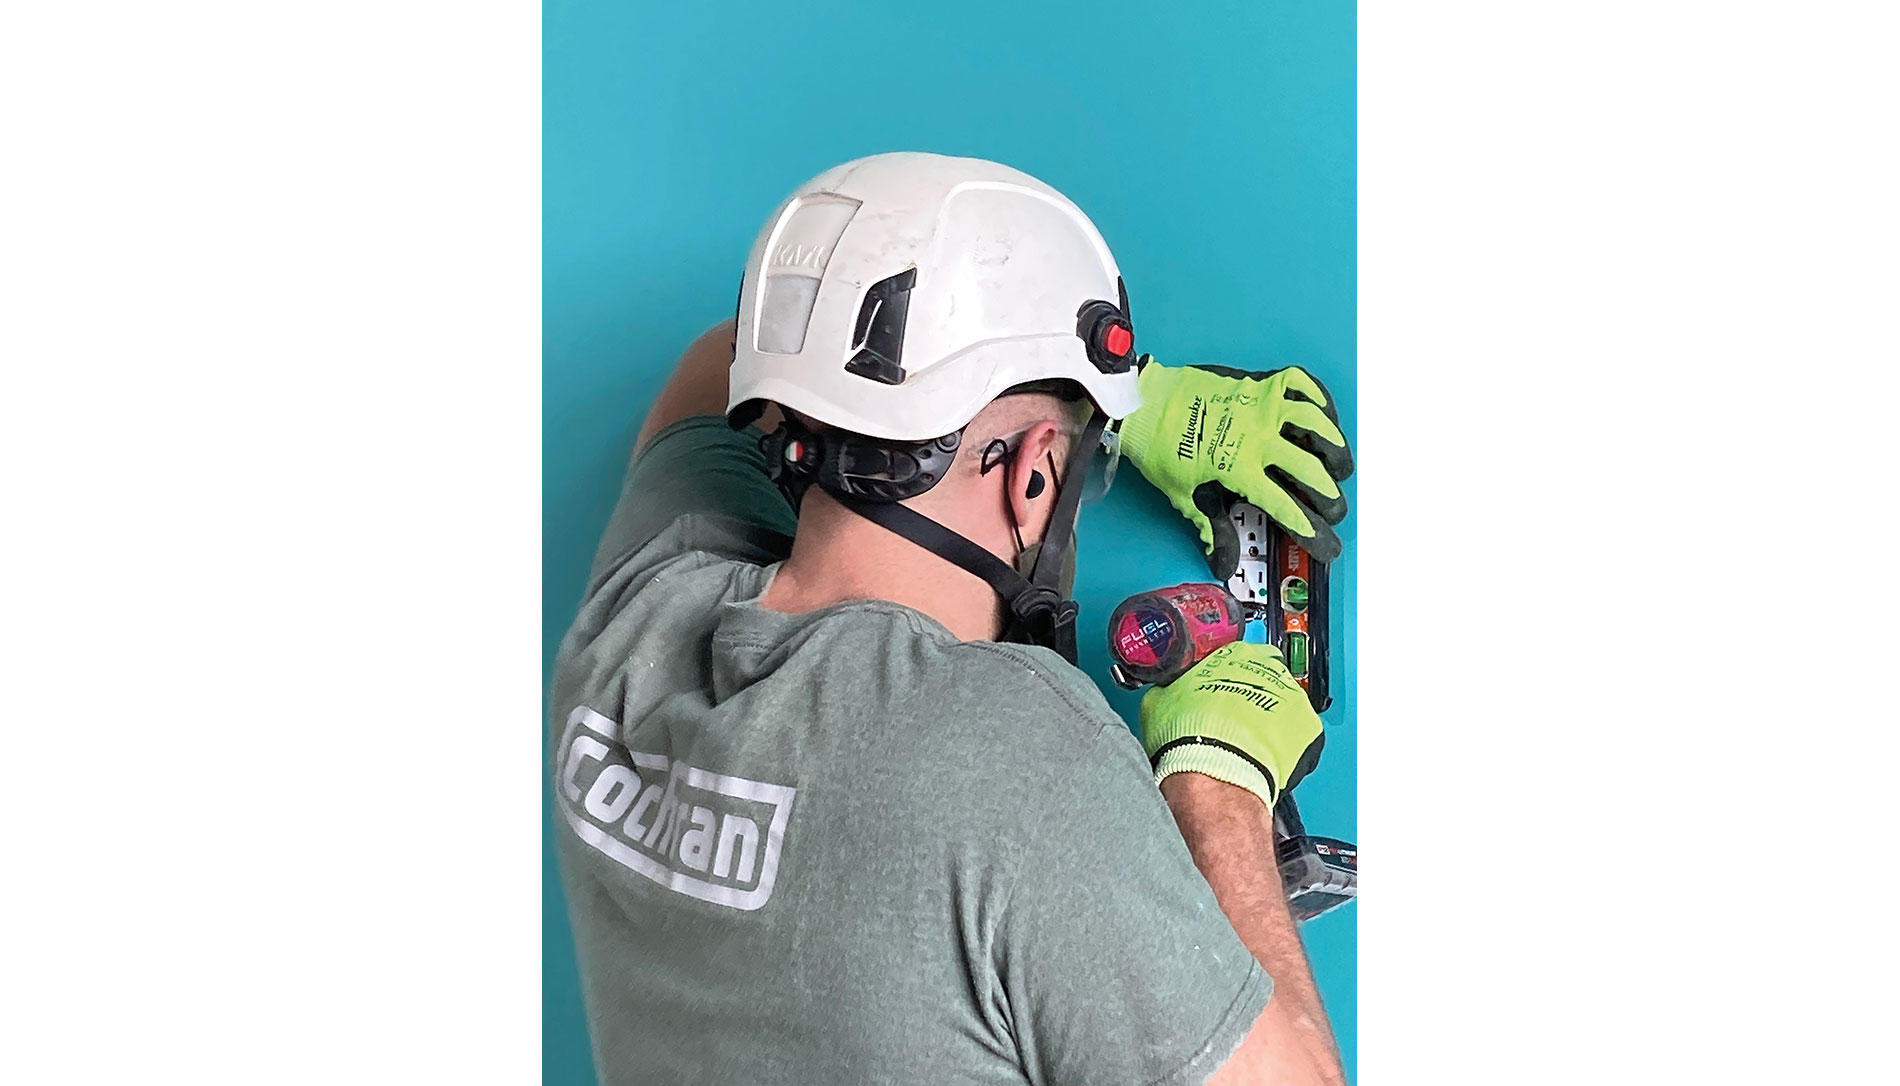 A man in a Cochran shirt and protective gear works on a wall outlet. Image by Cochran Inc.